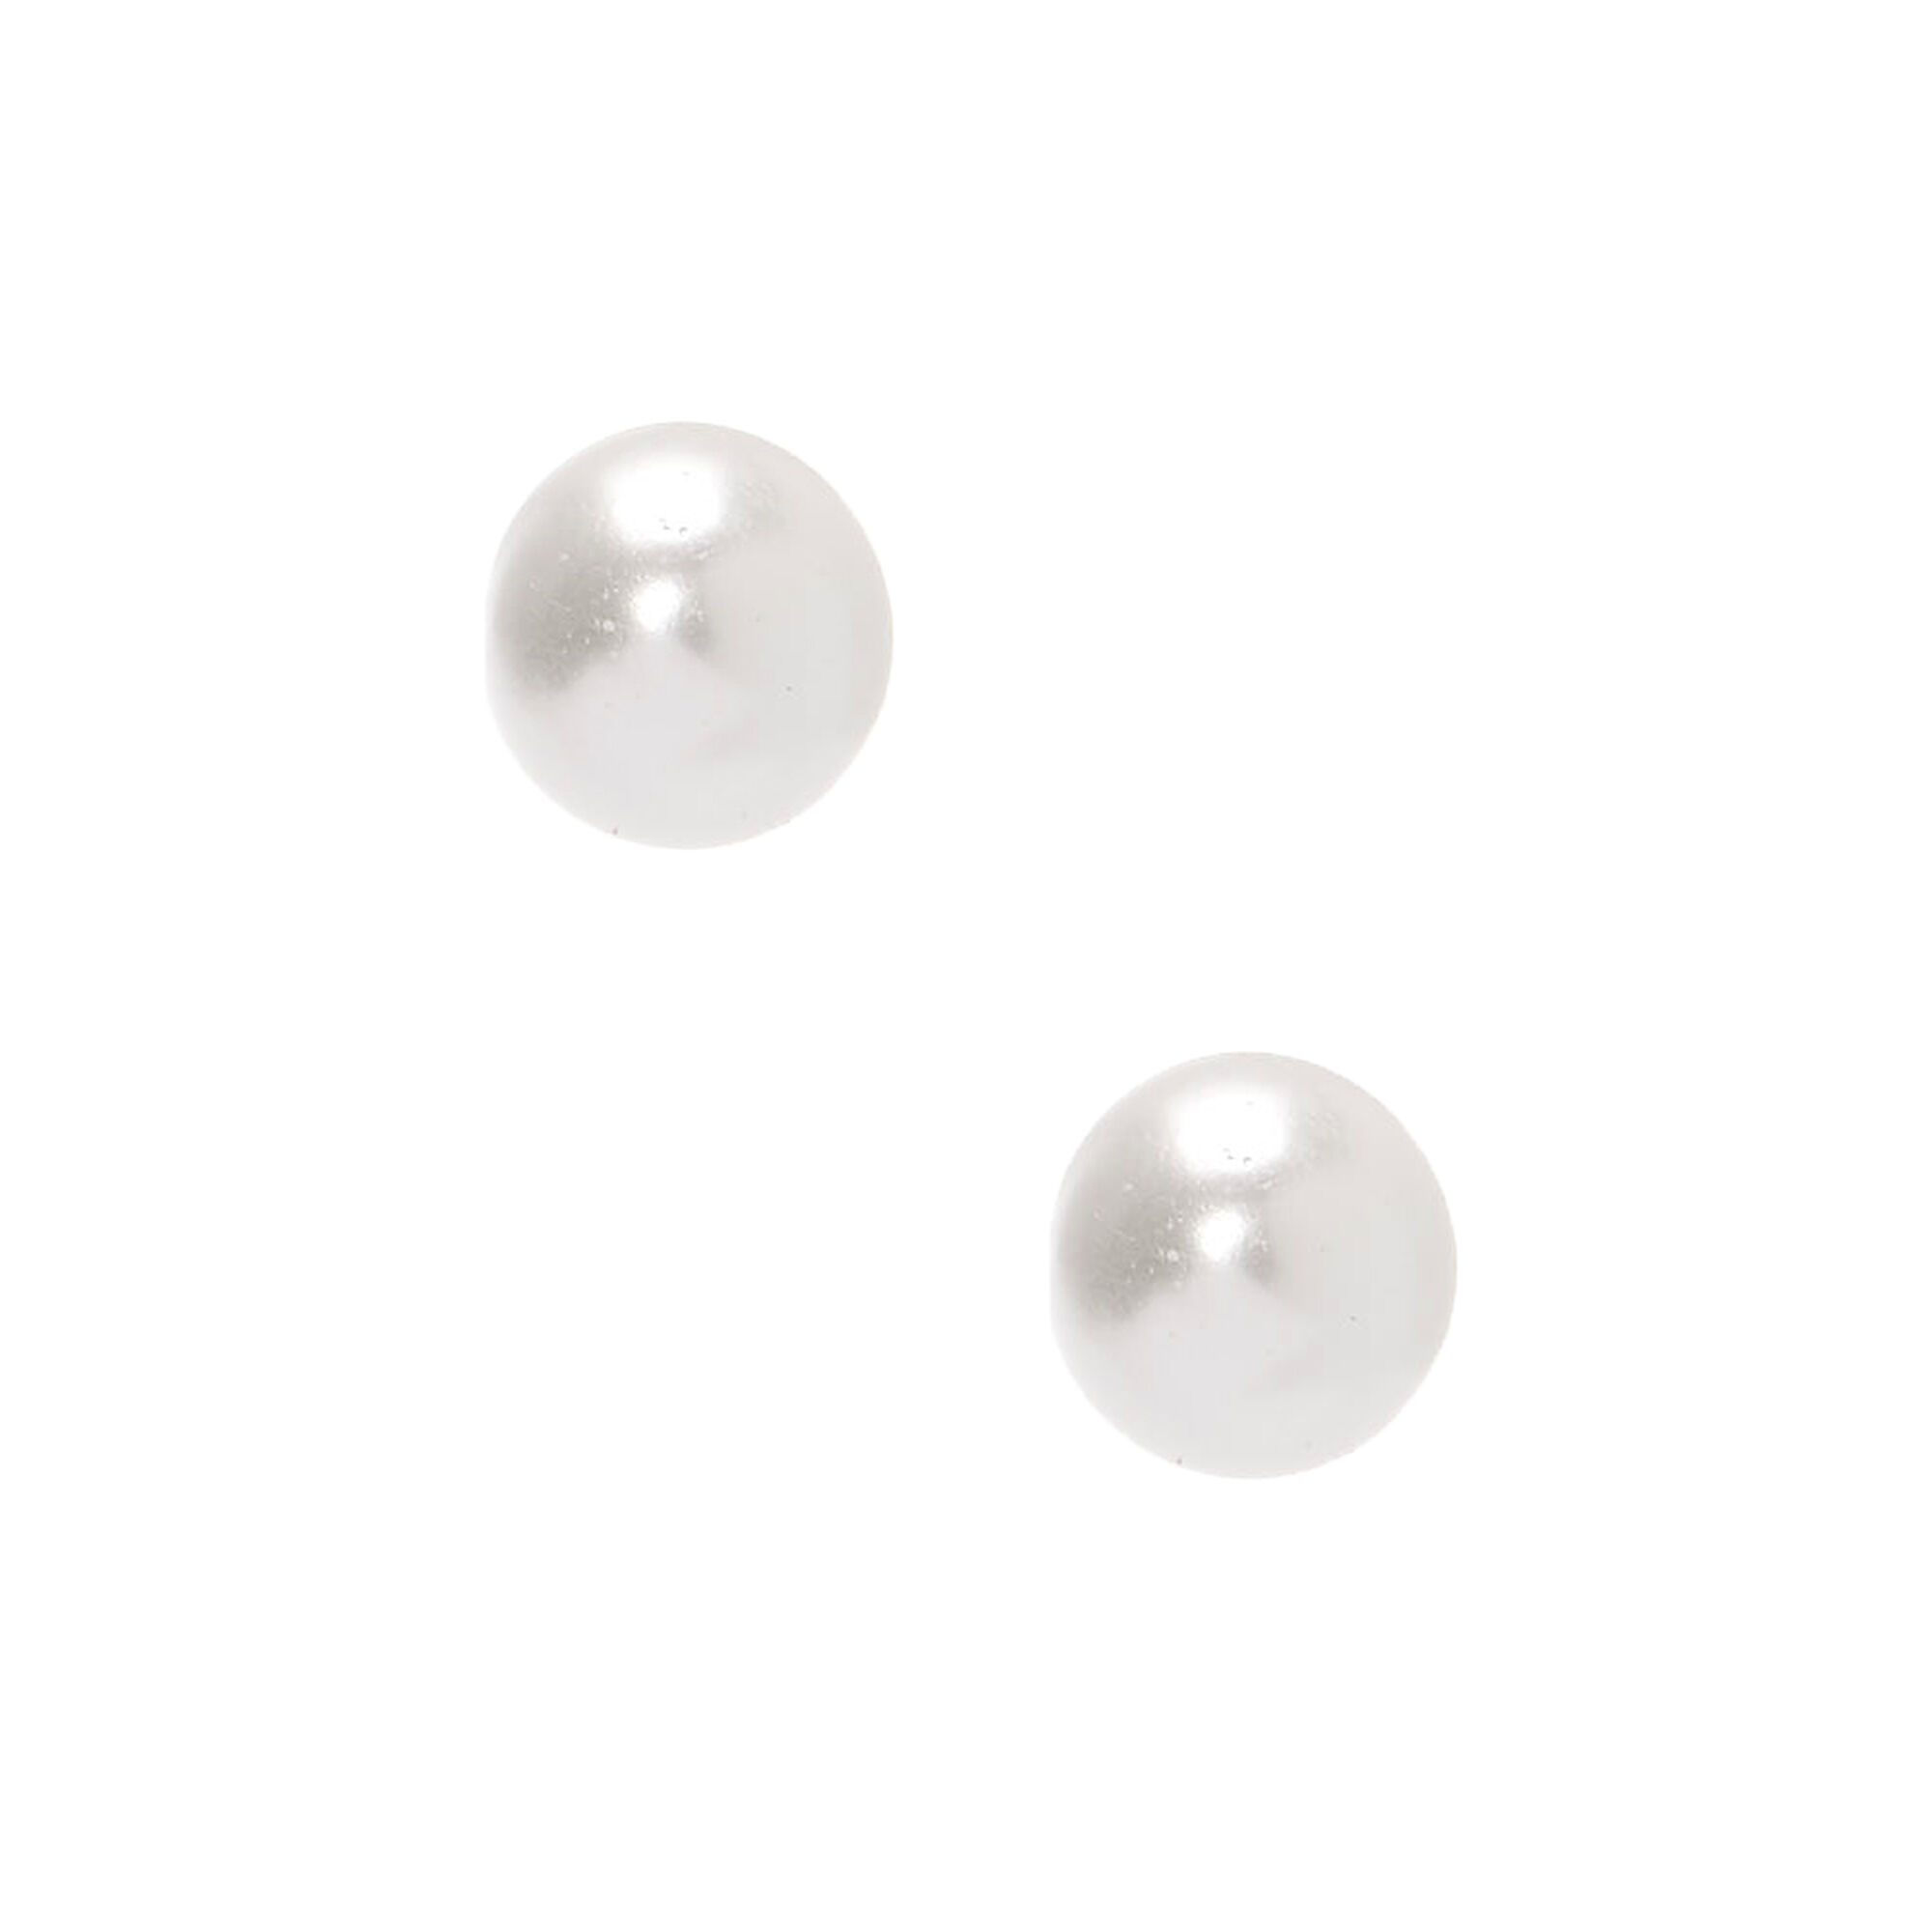 View Claires 4MM Glass Pearl Stud Earrings Silver information